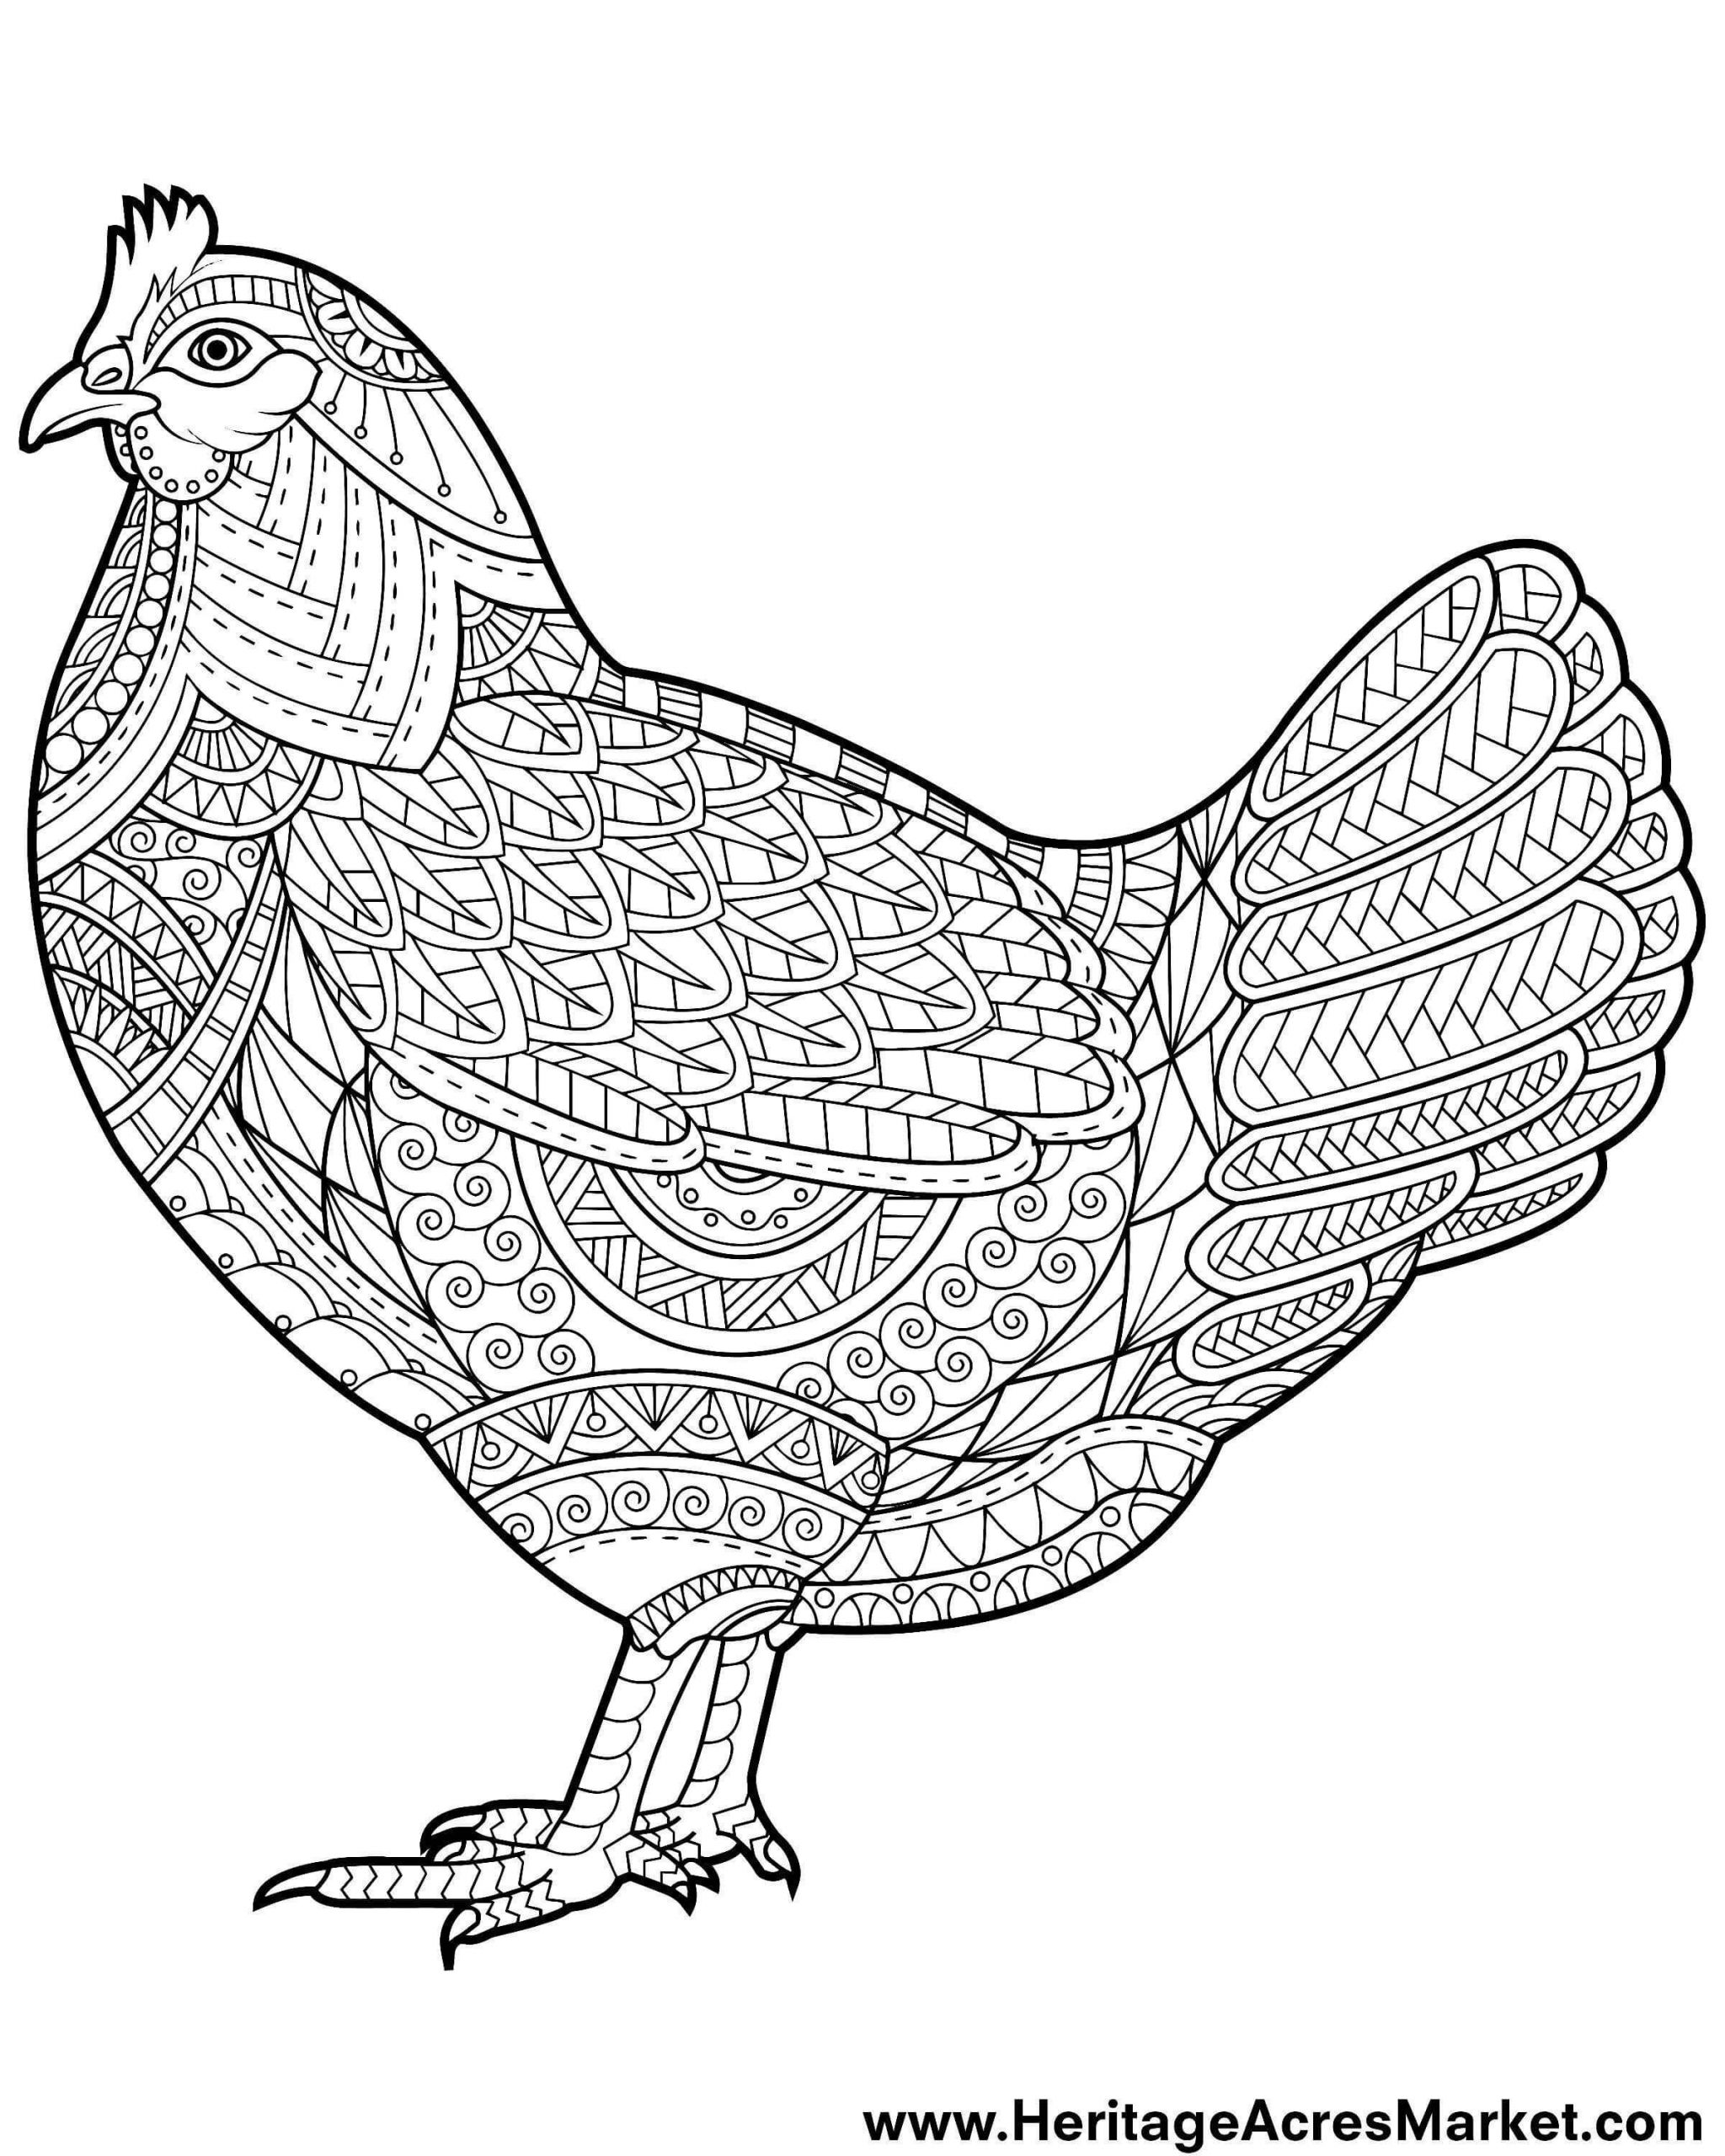 Chicken Coloring Pages For Adults
 Funky Chicken Coloring Page Heritage Acres Market LLC